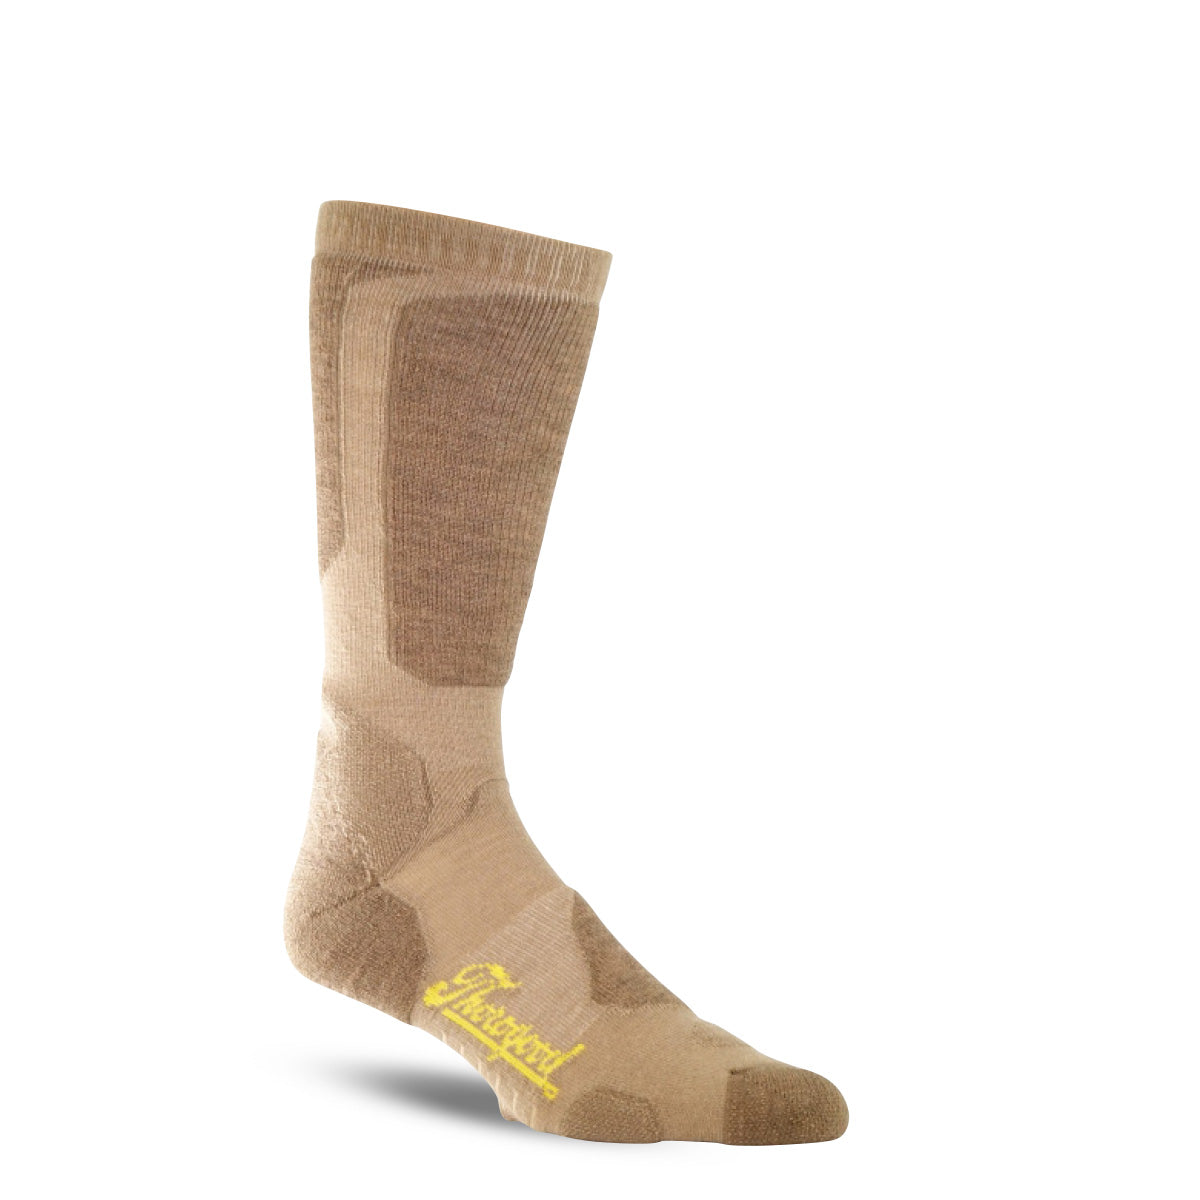 Thorogood Men's Light Duty Sock in Coyote from the side